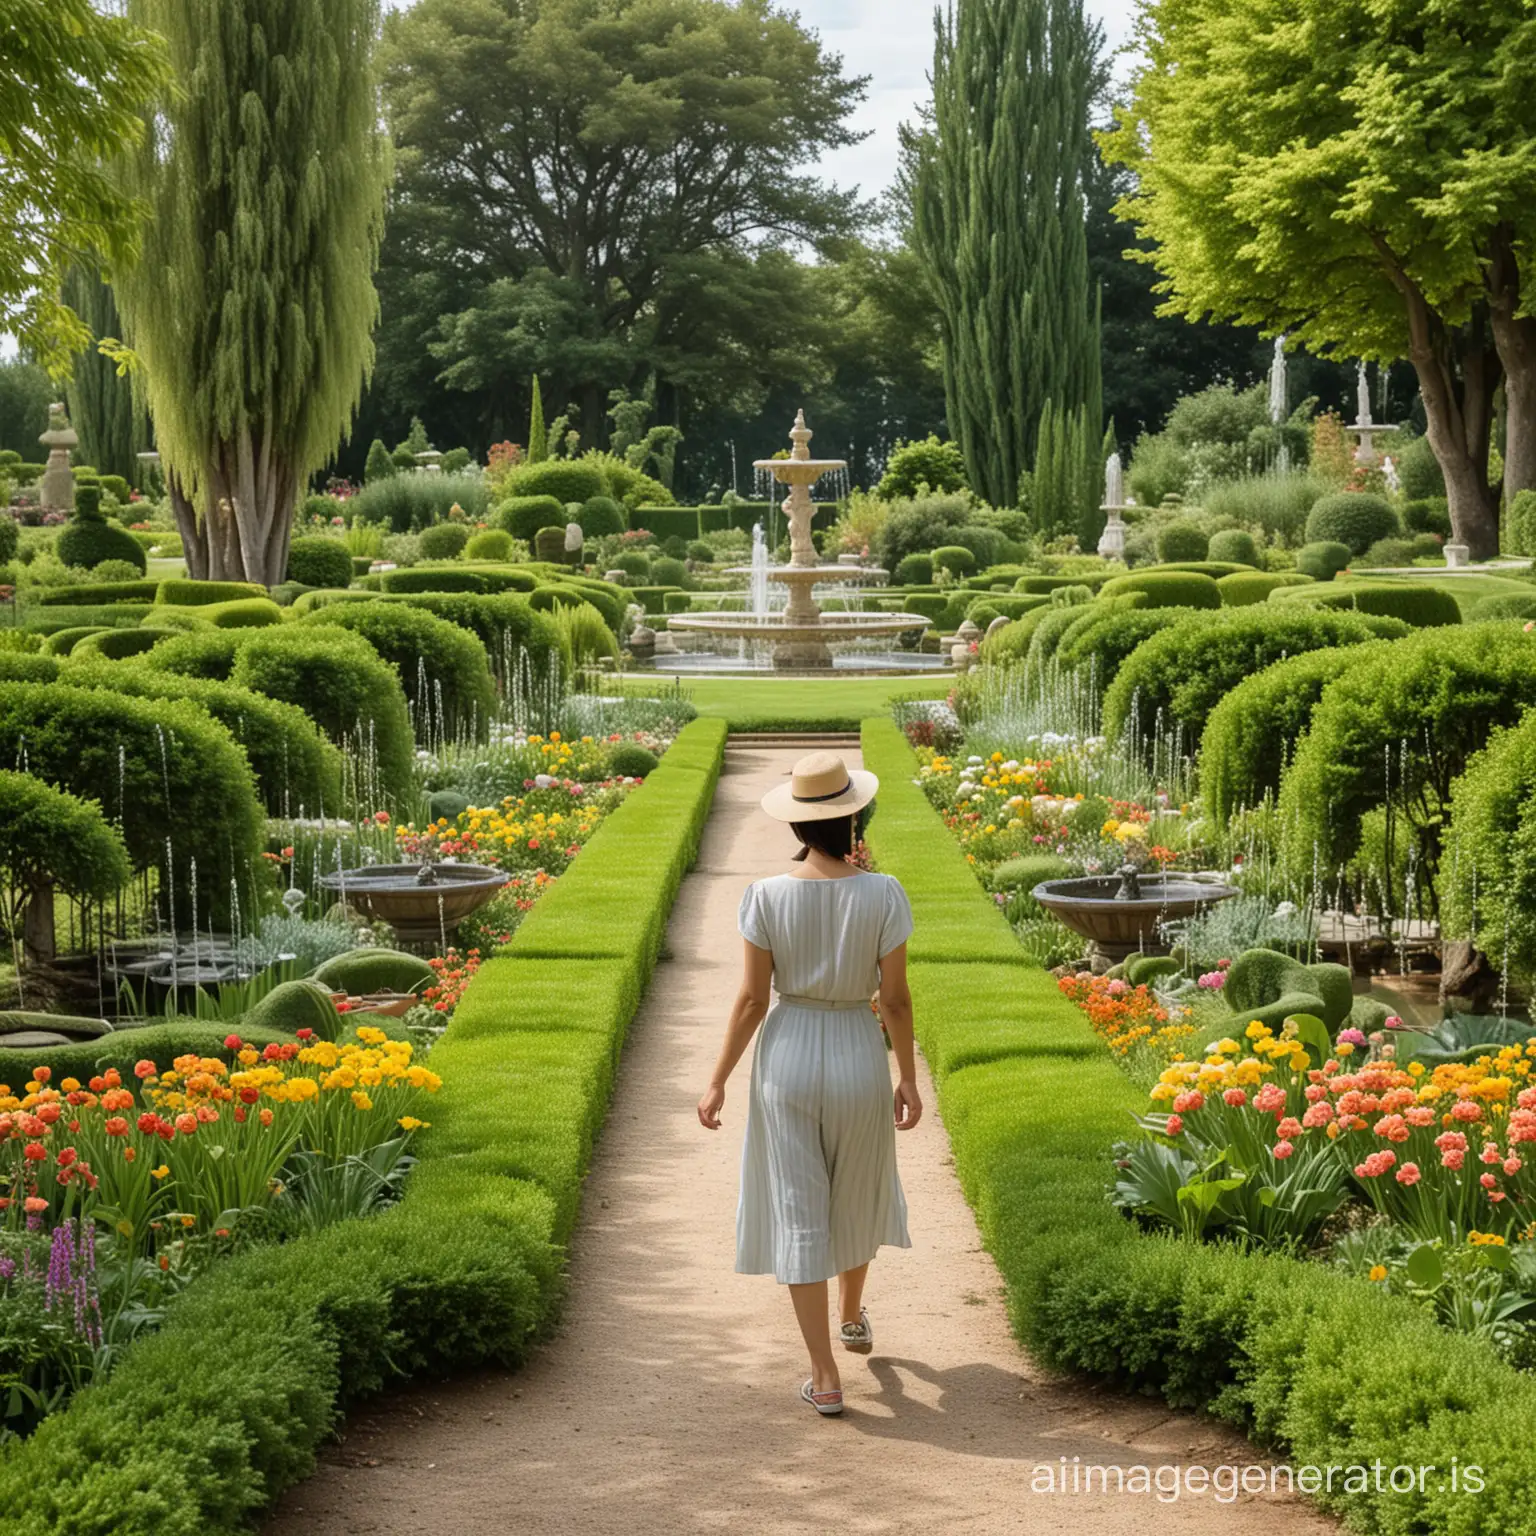 An Asian woman walking in a beautiful, extensive garden in France with many lawns and fountains.